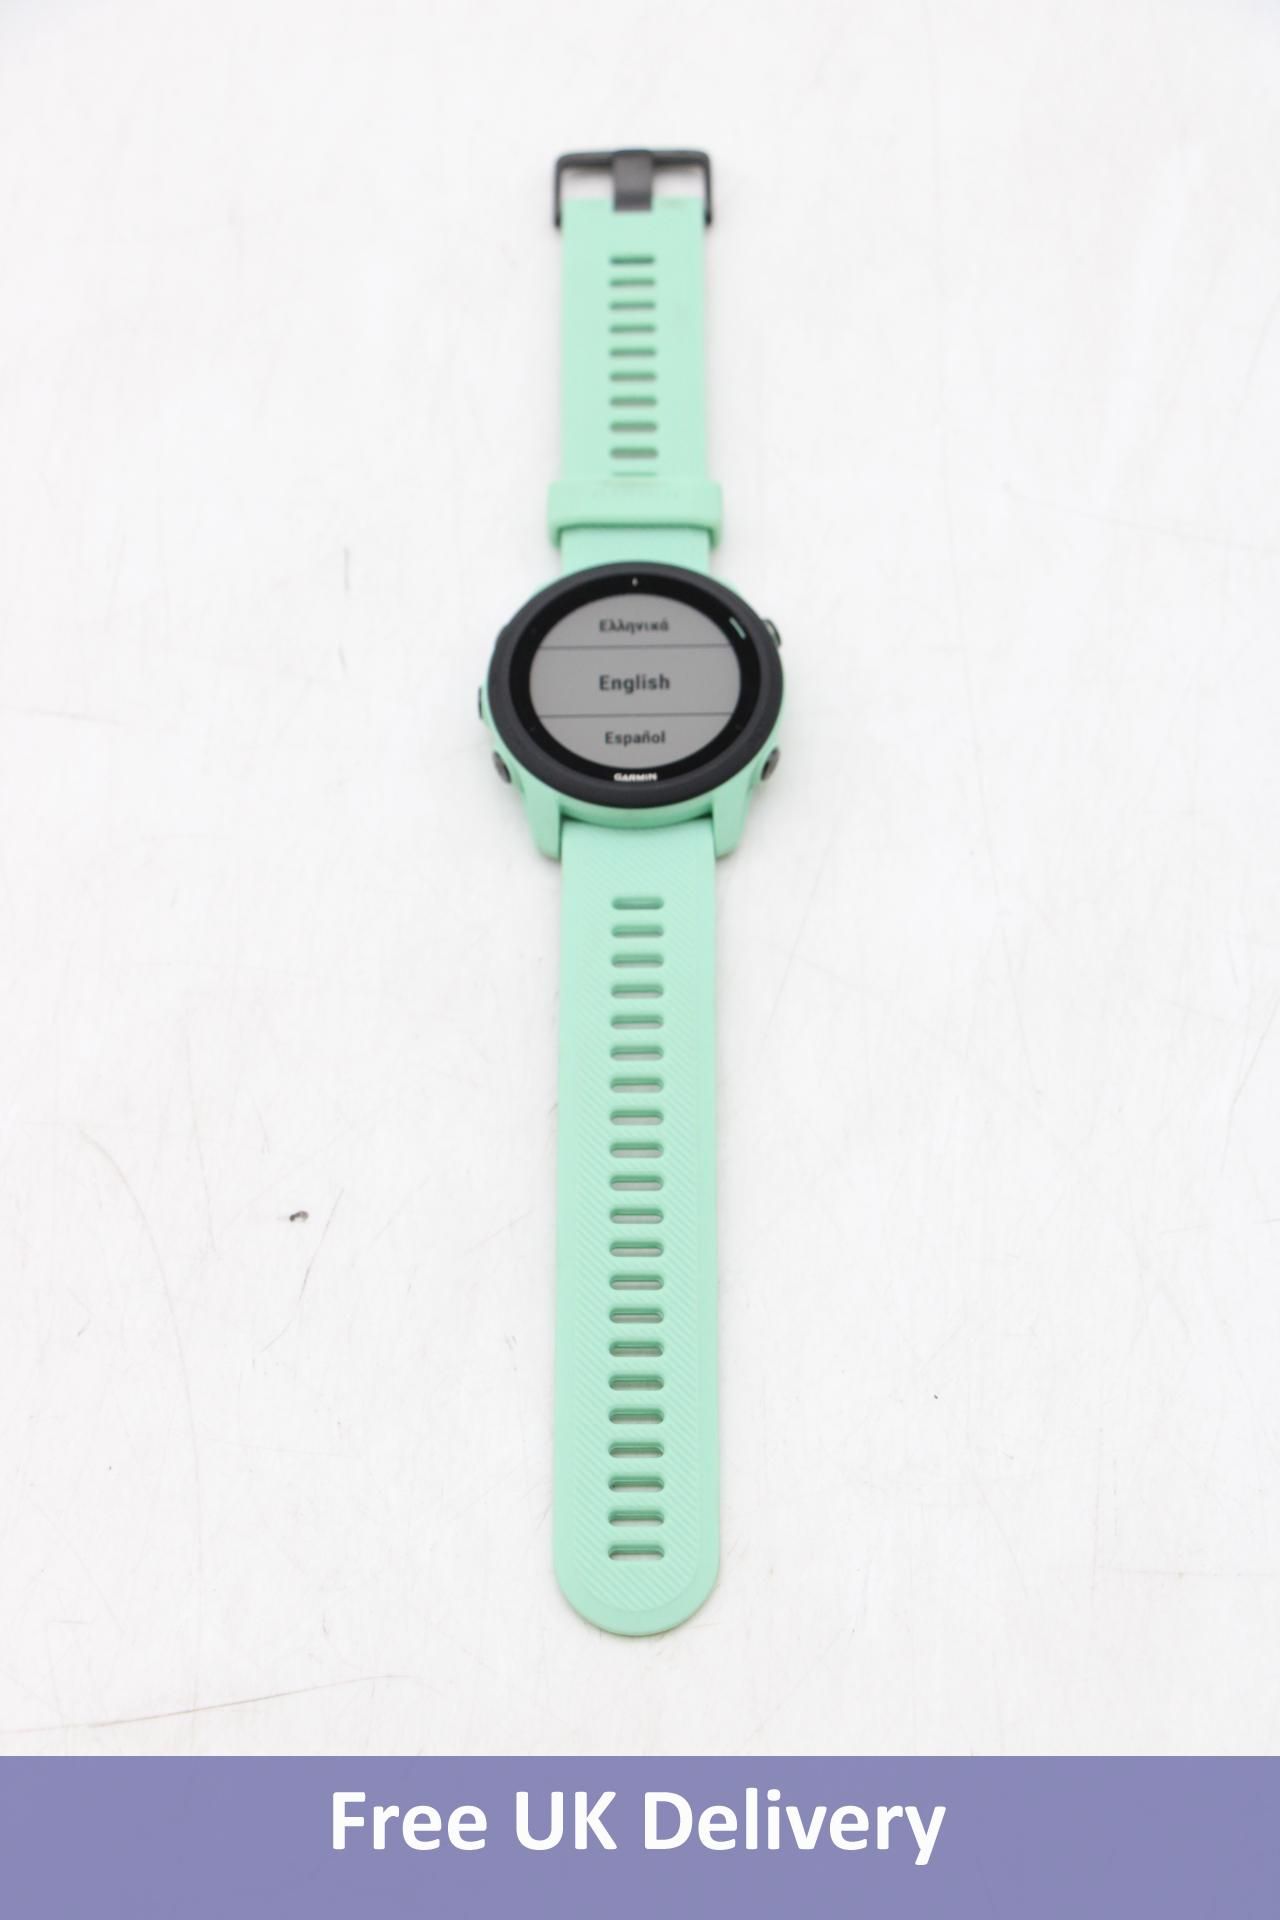 Garmin Forerunner 745 Watch, Neo Tropic. Used good condition, no box or accessories